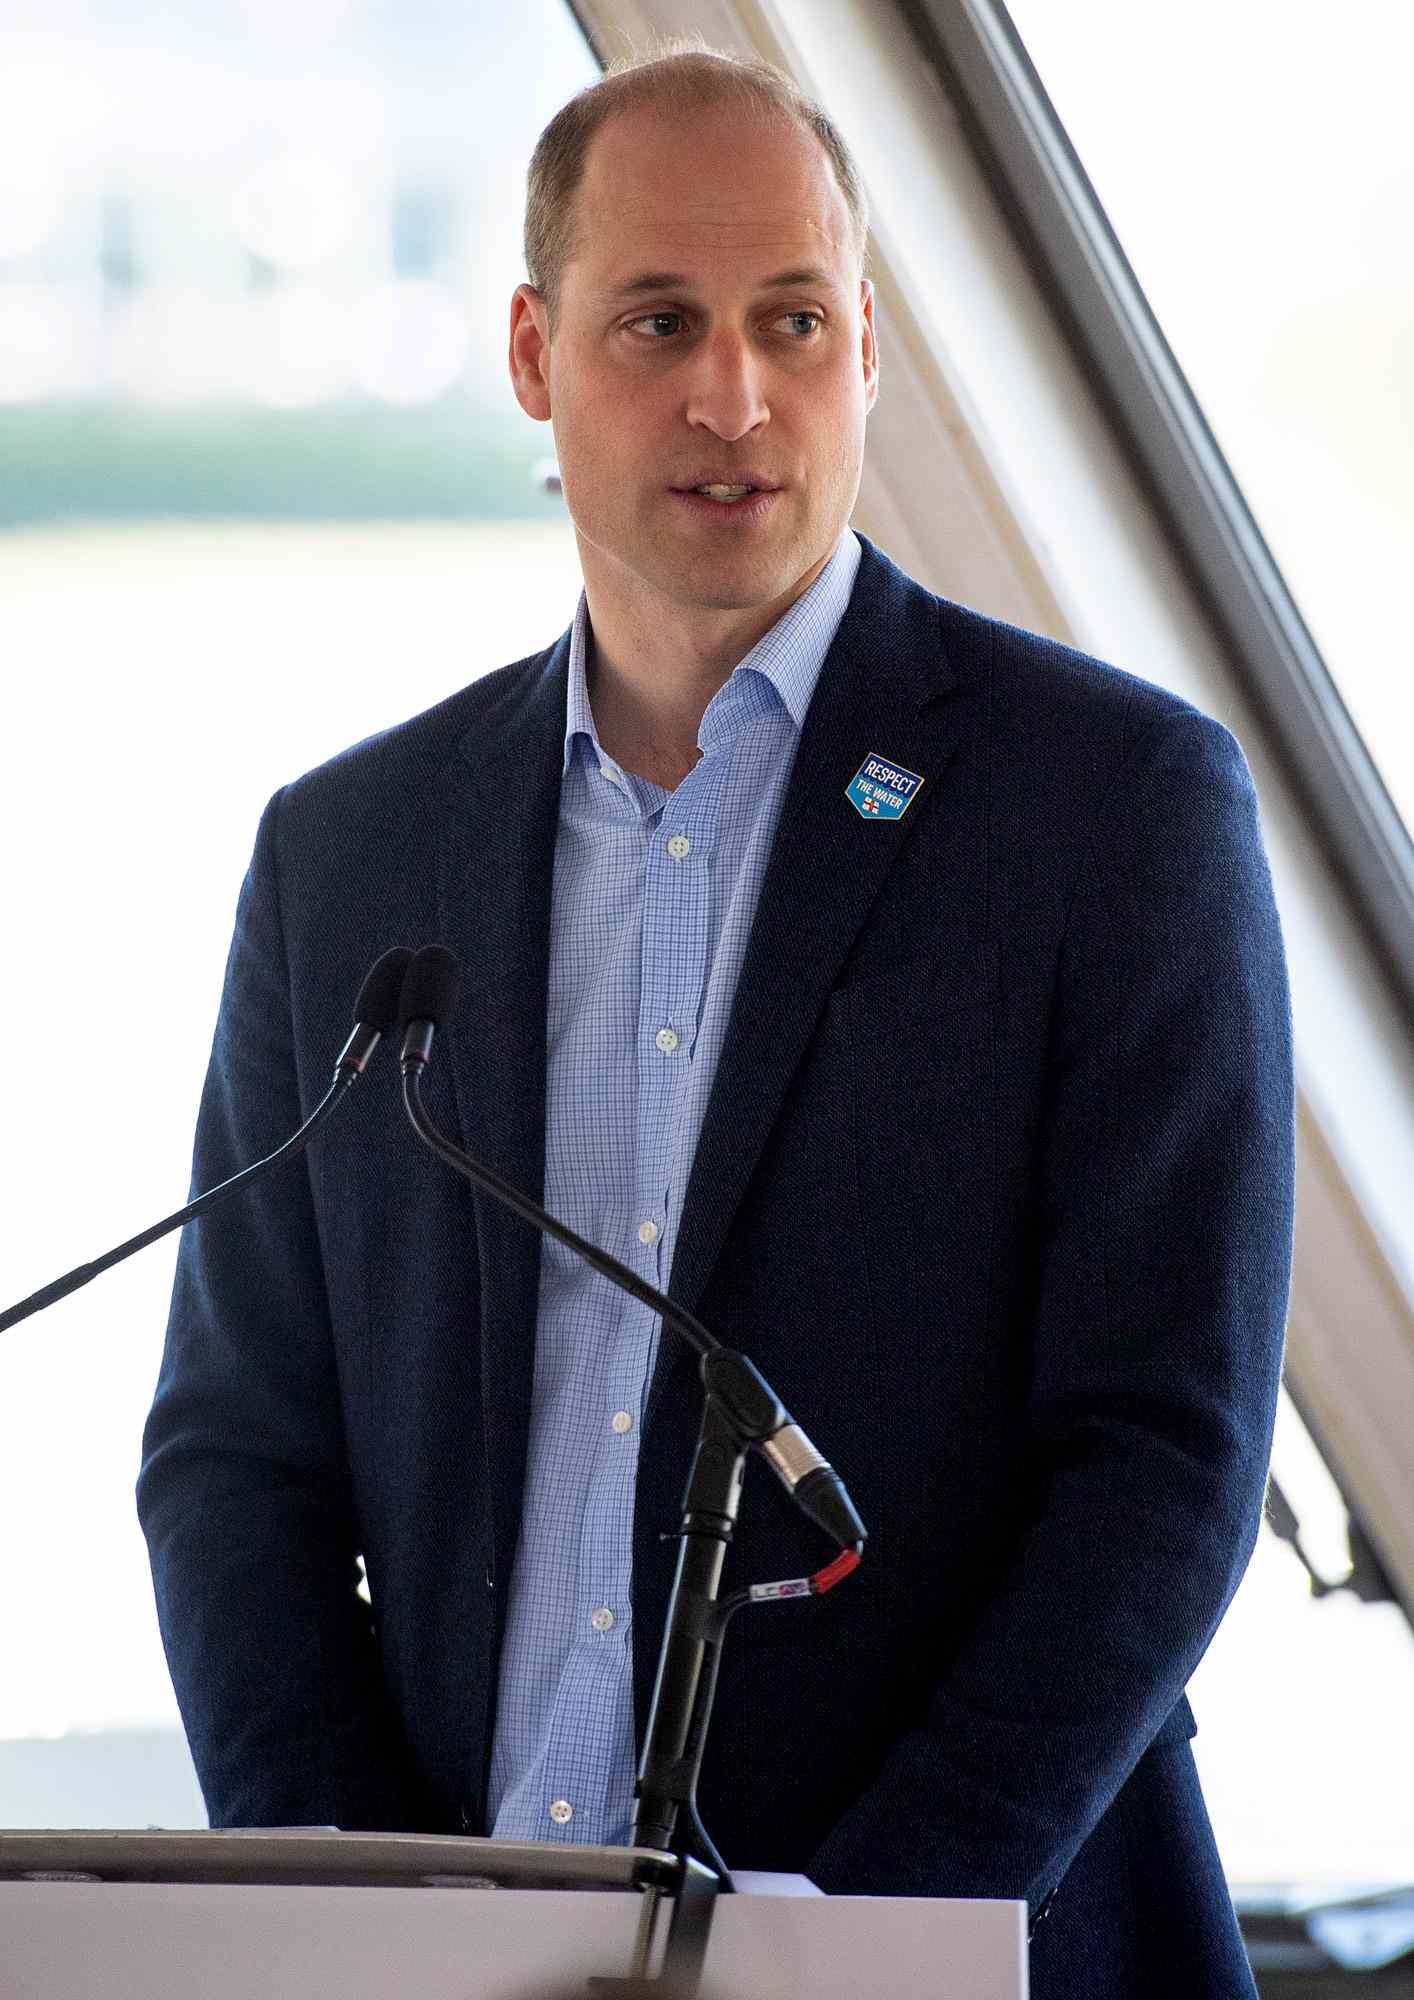 The Duke Of Cambridge Launches River Thames Safety Campaign